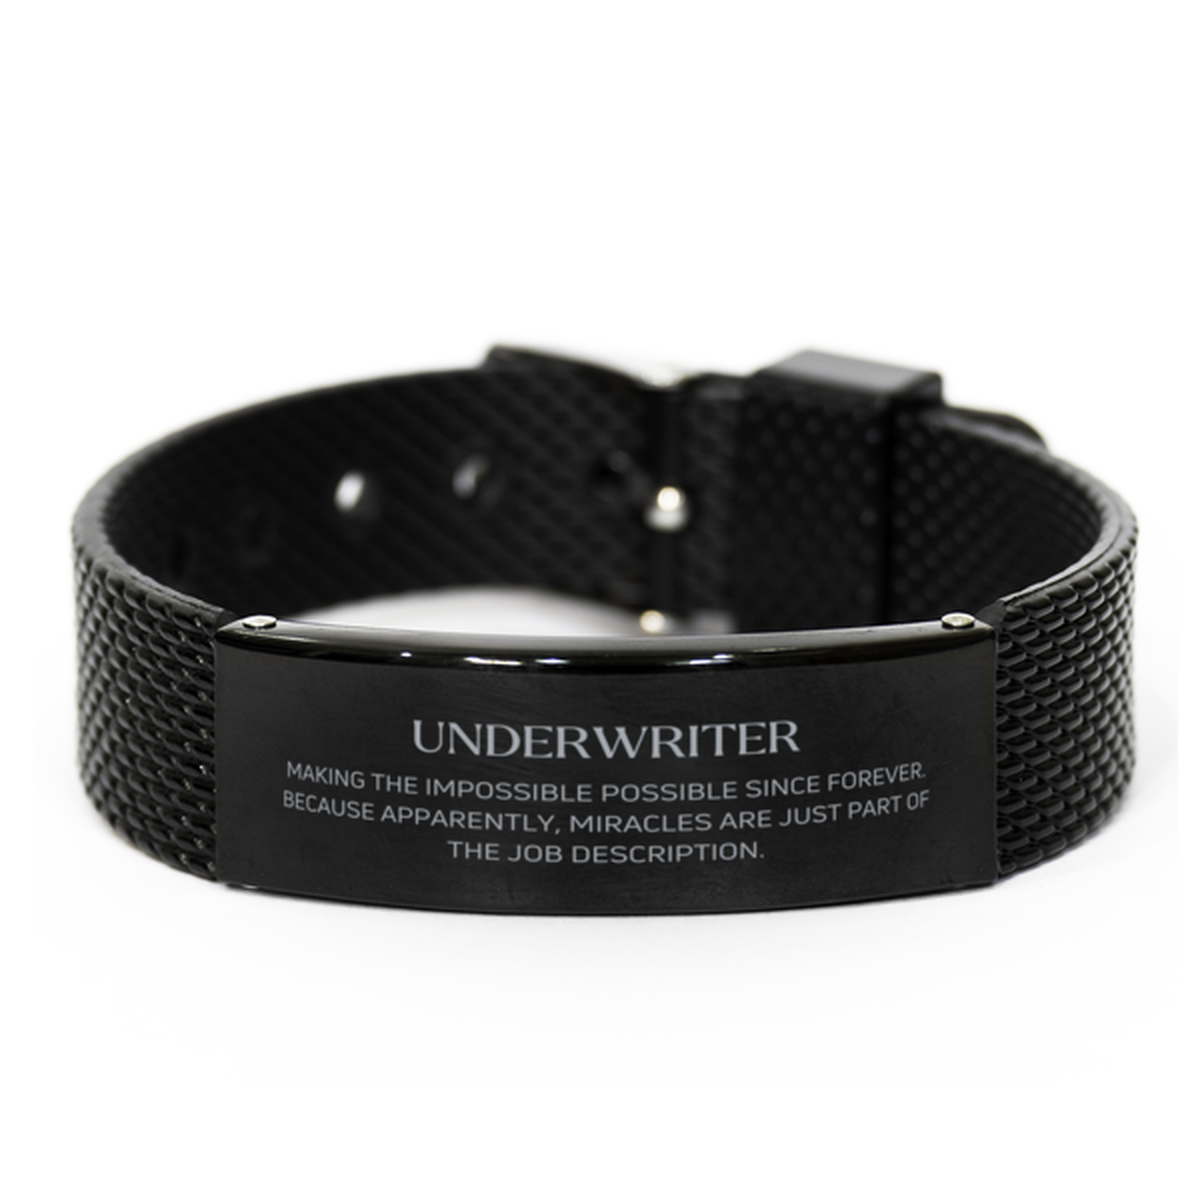 Funny Underwriter Gifts, Miracles are just part of the job description, Inspirational Birthday Black Shark Mesh Bracelet For Underwriter, Men, Women, Coworkers, Friends, Boss